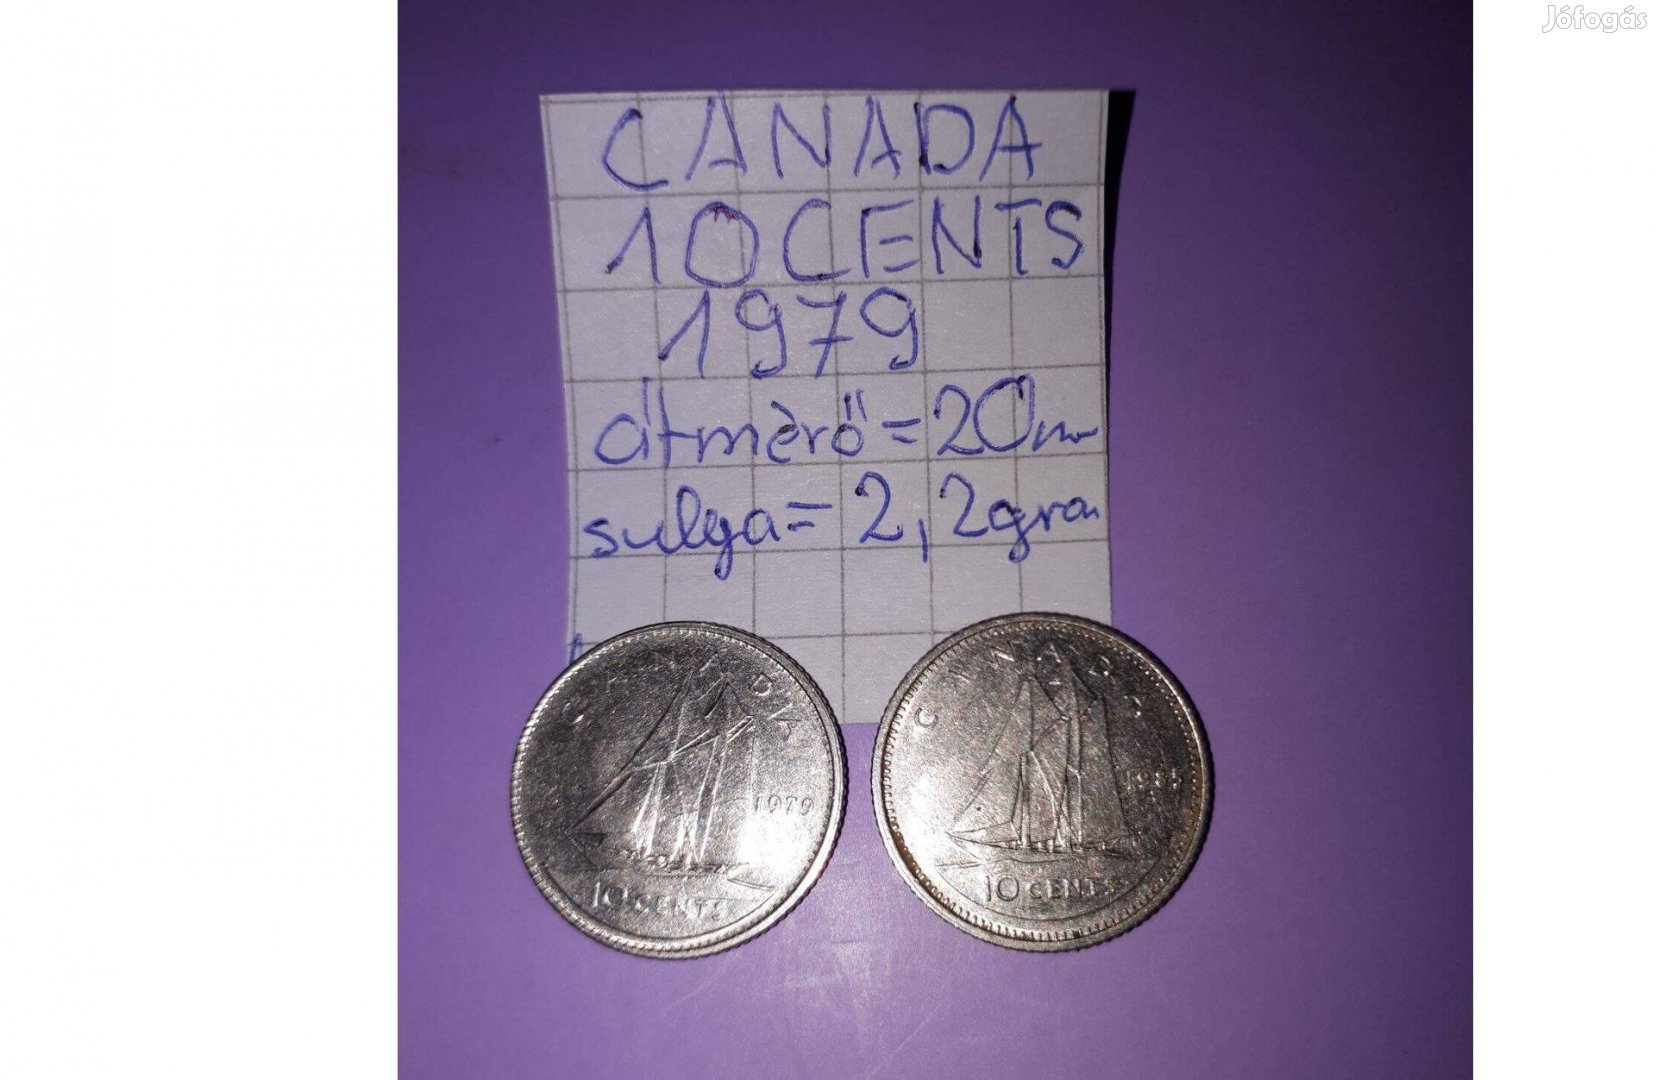 Canada 10 cents 1979